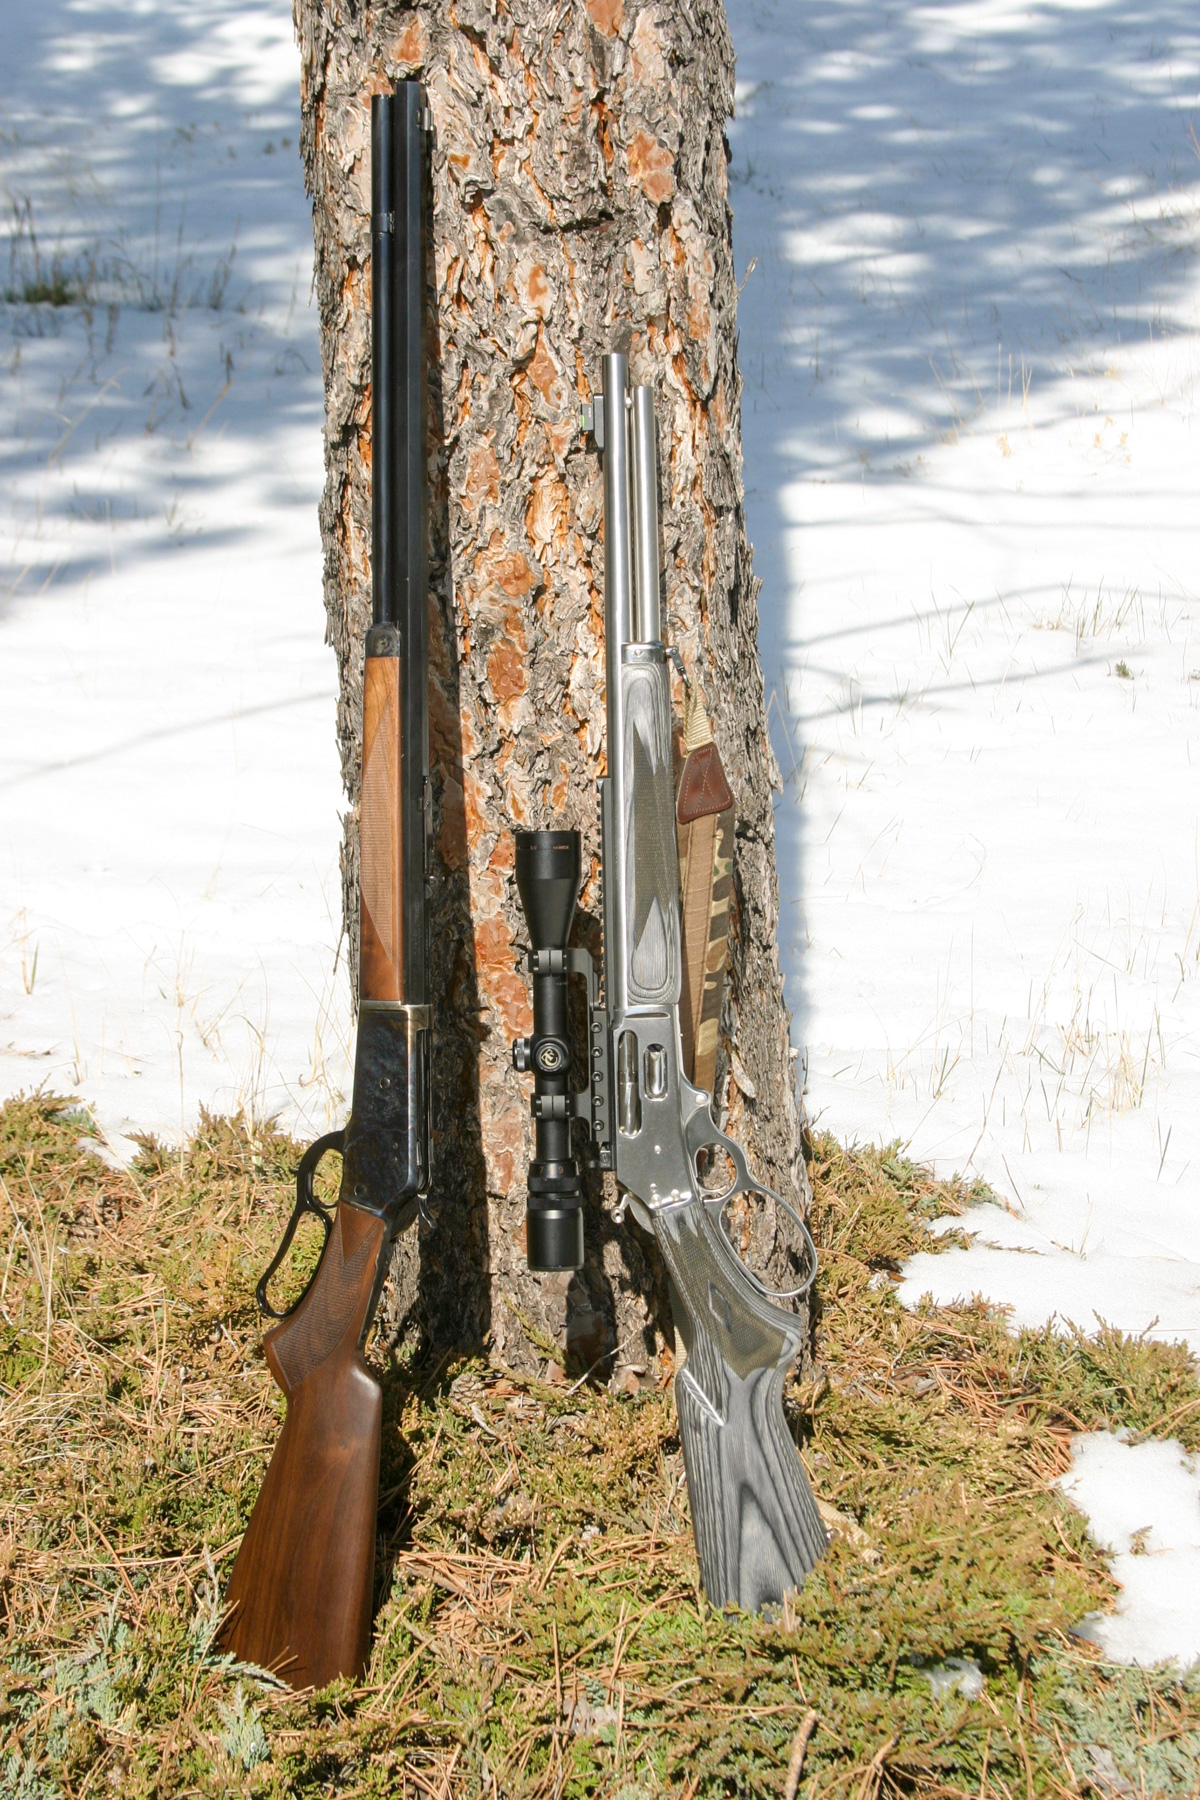 Brezny BrandNewHuntingRiflesPART1 2 Two Brand-New Hunting Rifles in 45-70 Government (Part 1)